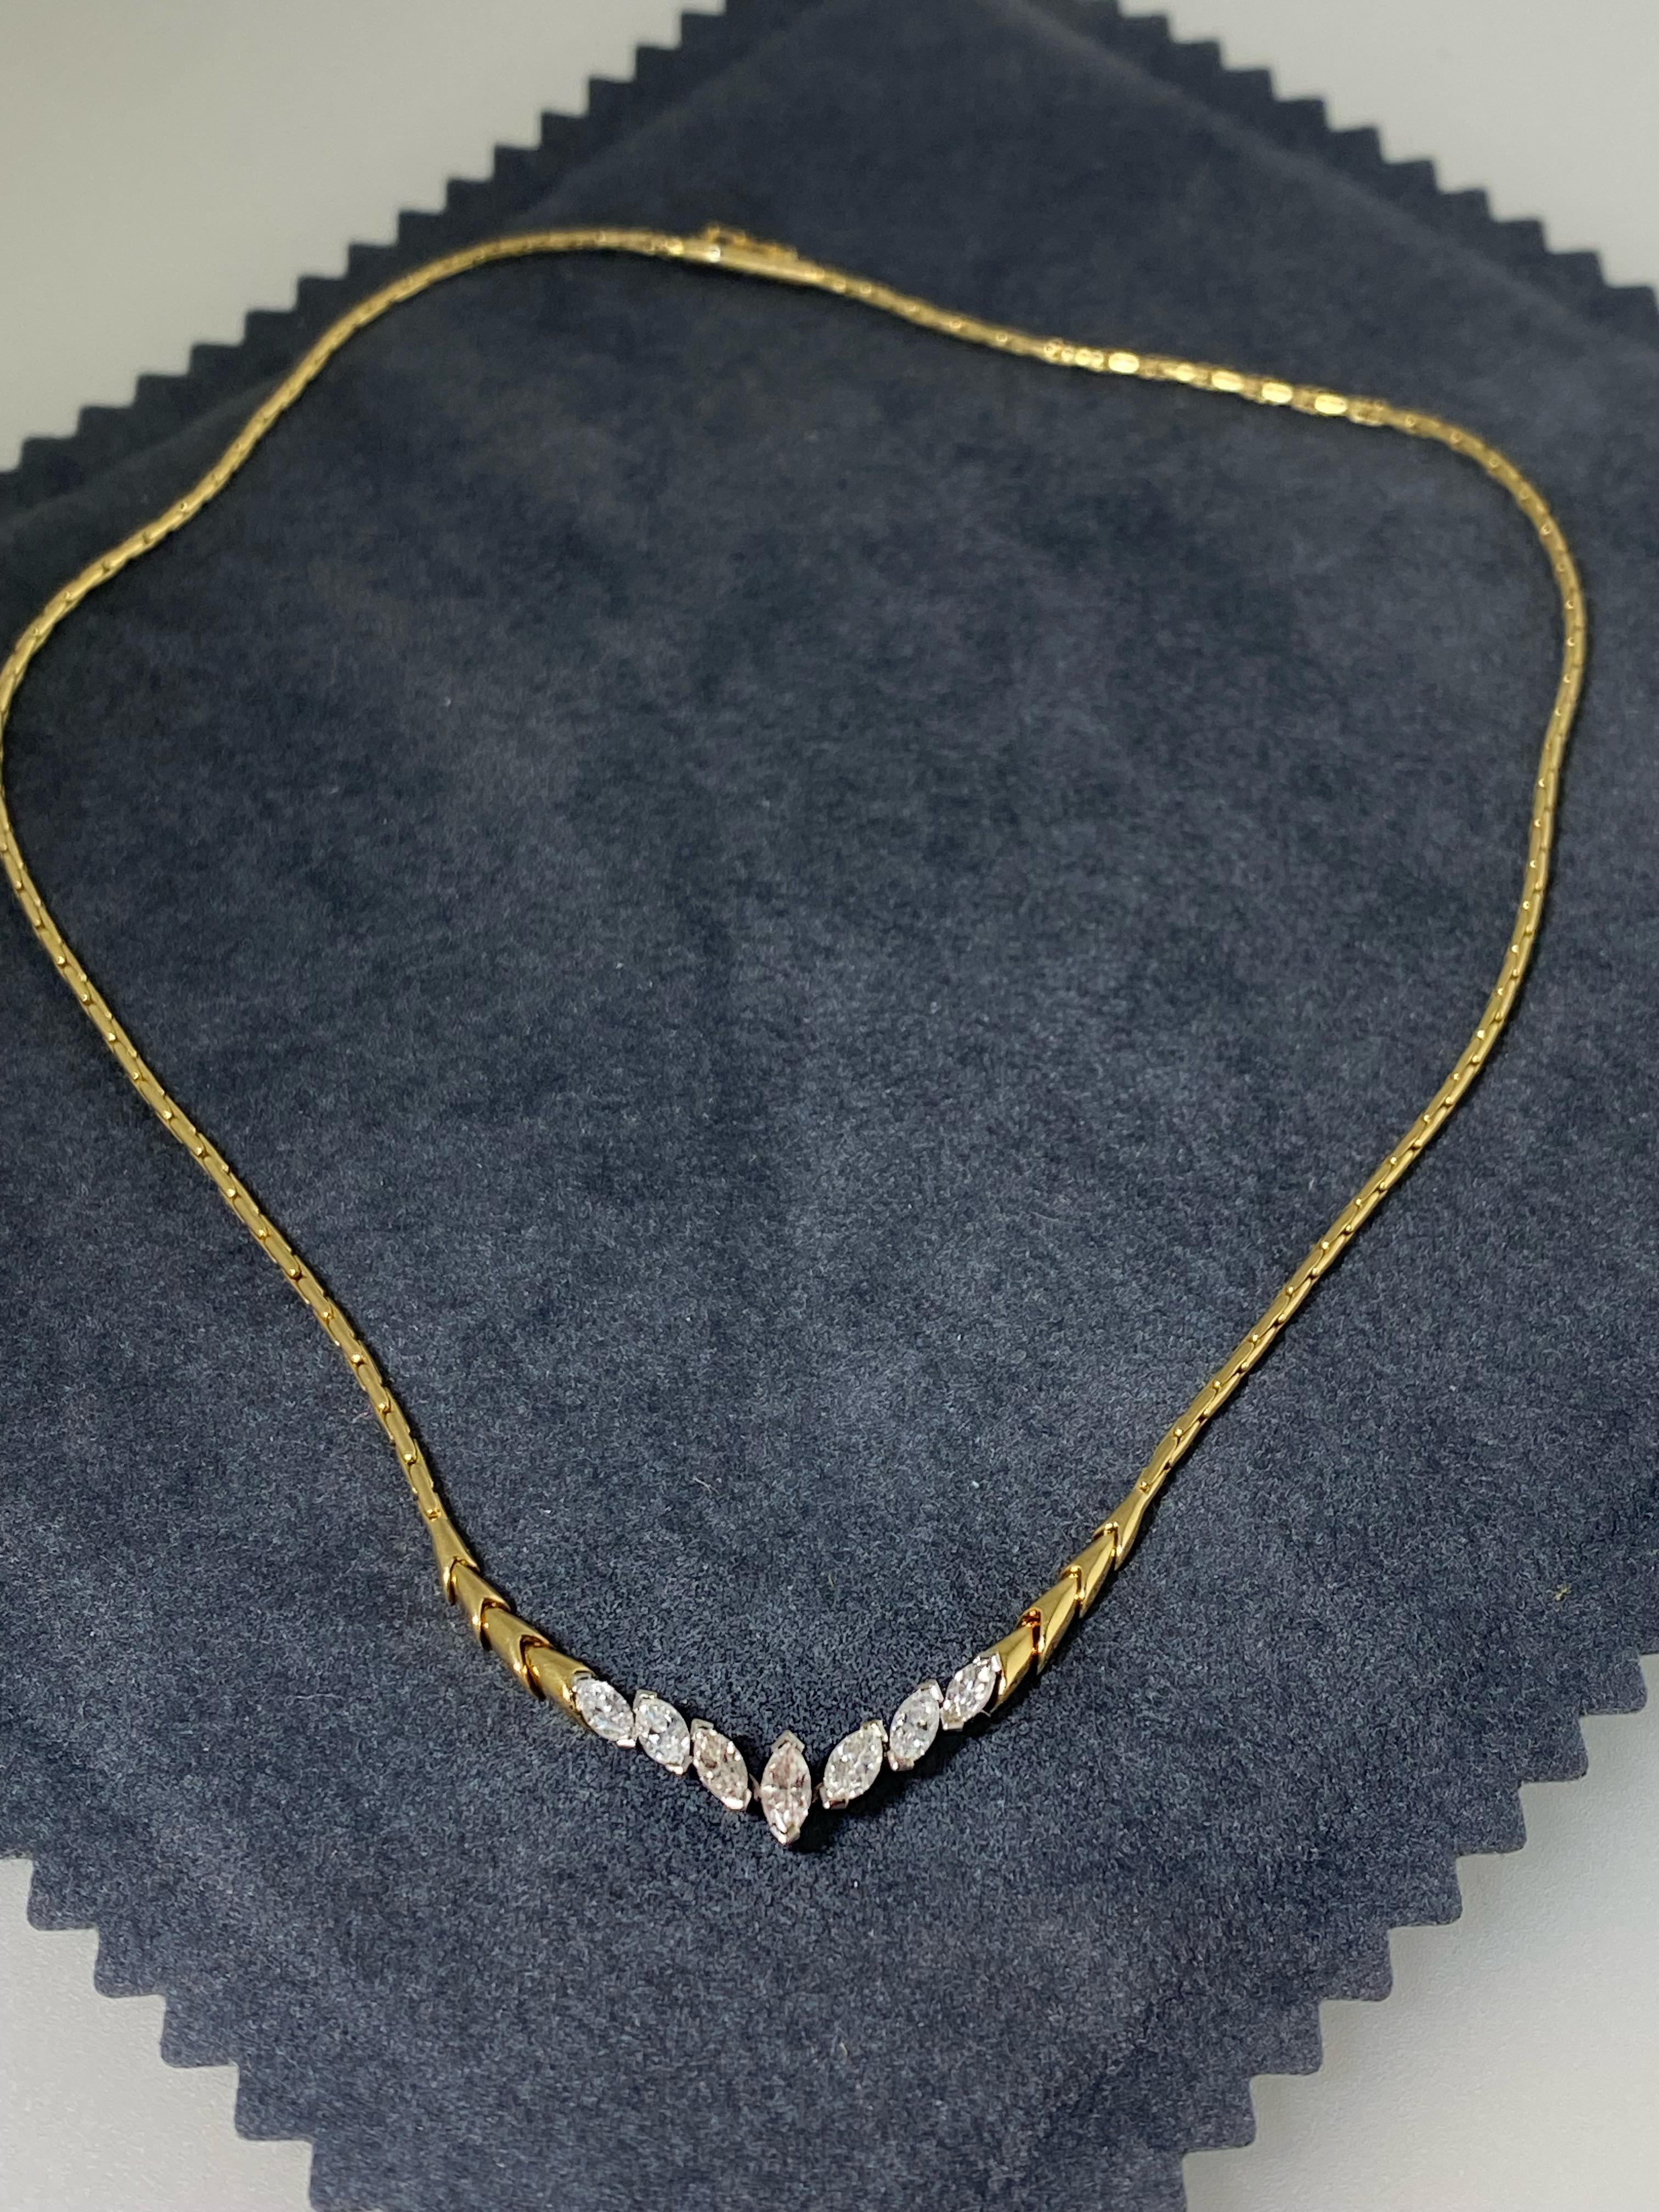 1.00ct Marquise Diamond (x 7) Necklace in 18K Yellow Gold, valued at $5900. For Sale 2